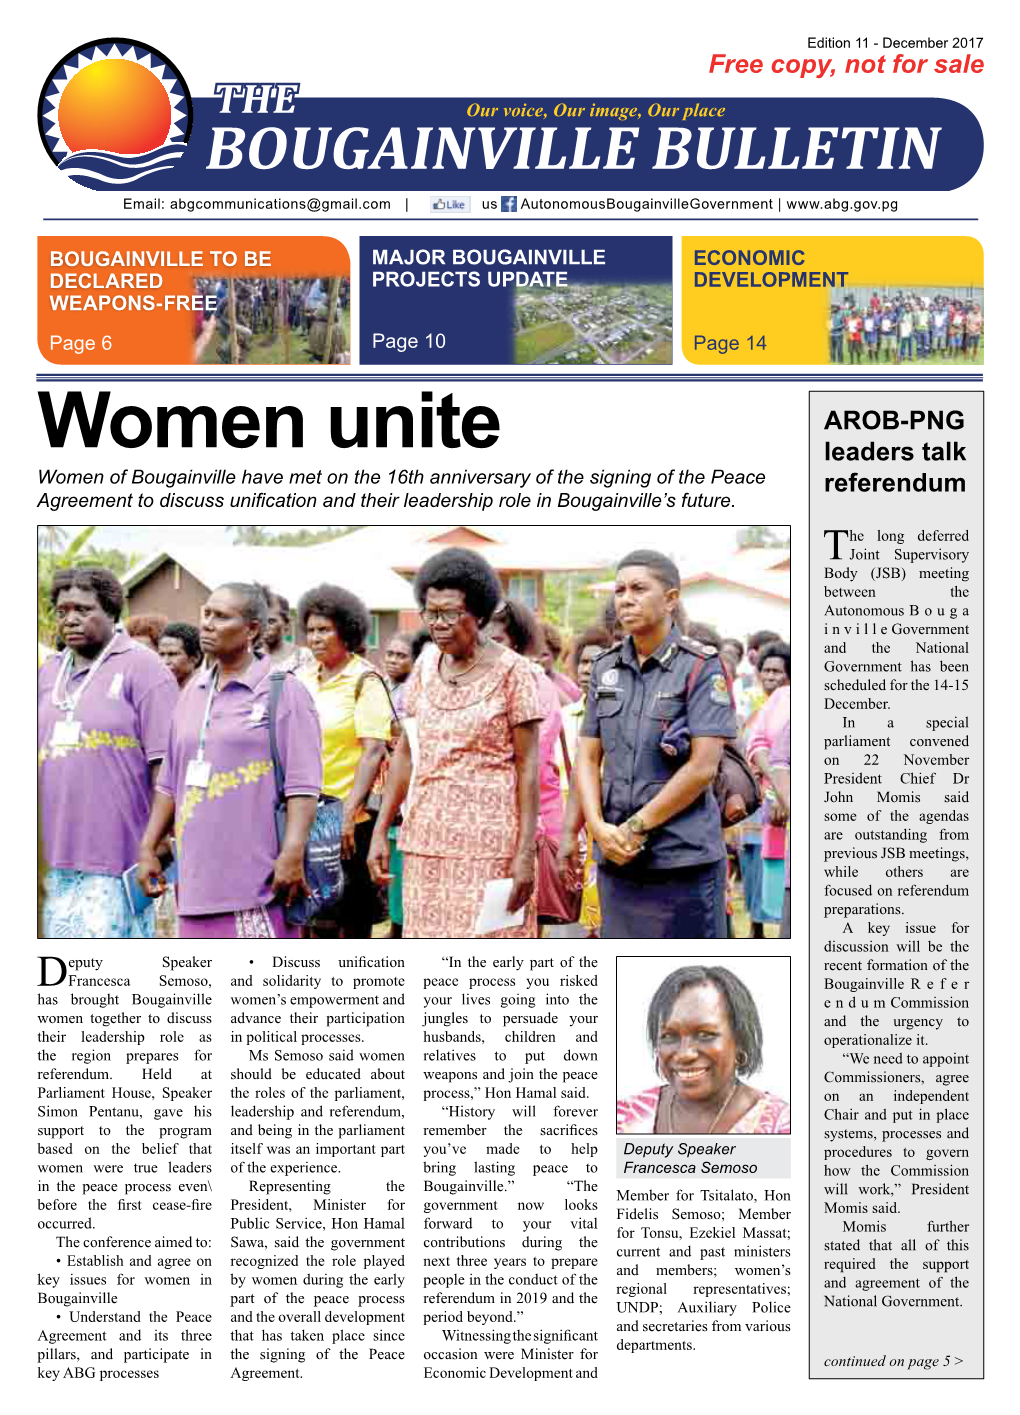 The Bougainville Bulletin Edition 11 2017